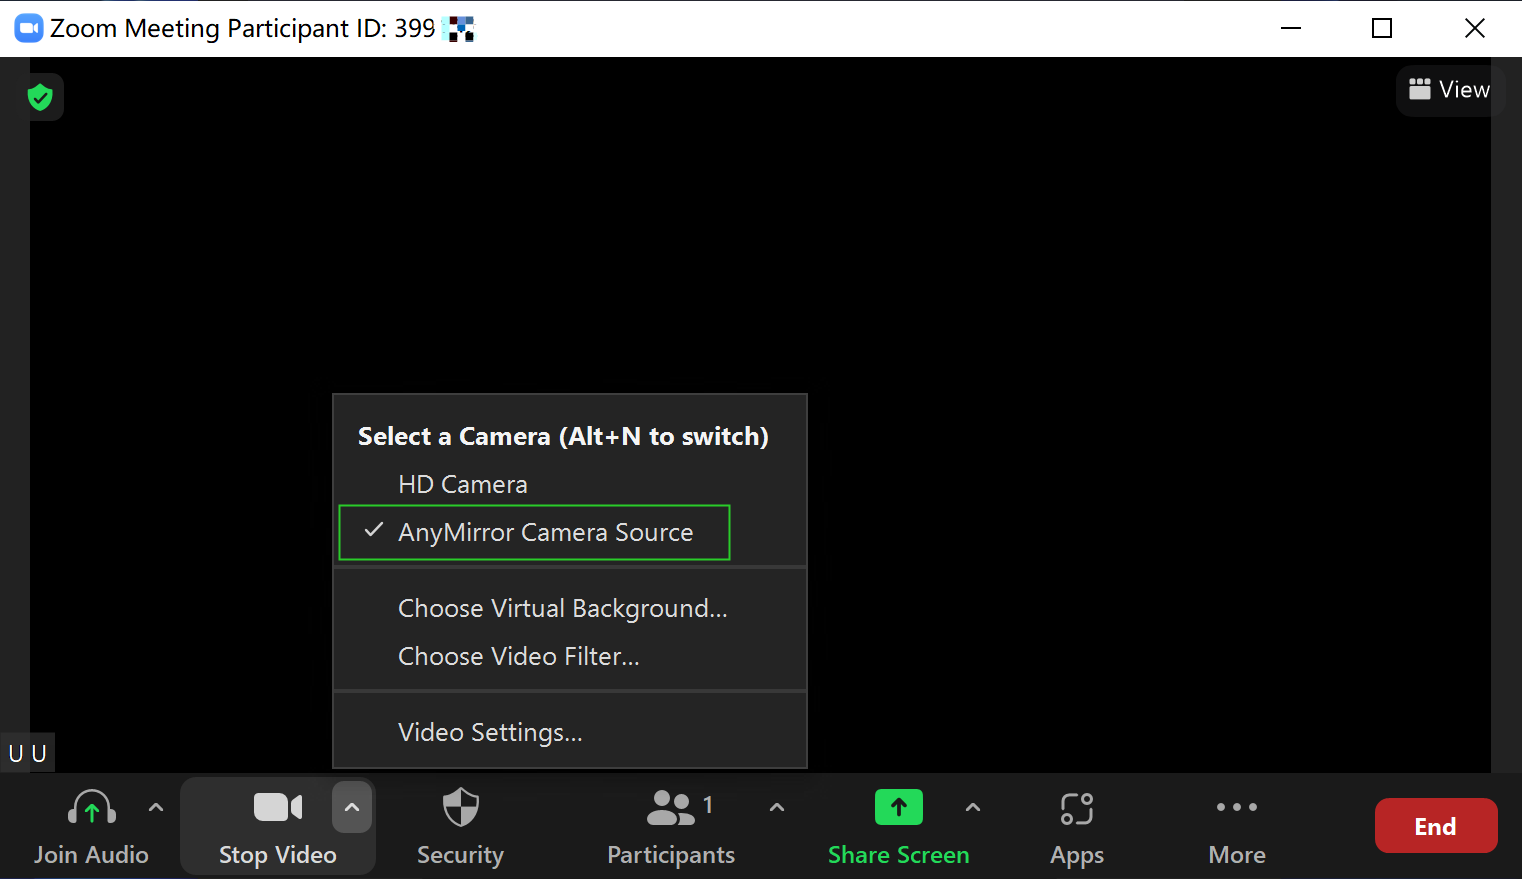 Camera Settings for Stream to Conference